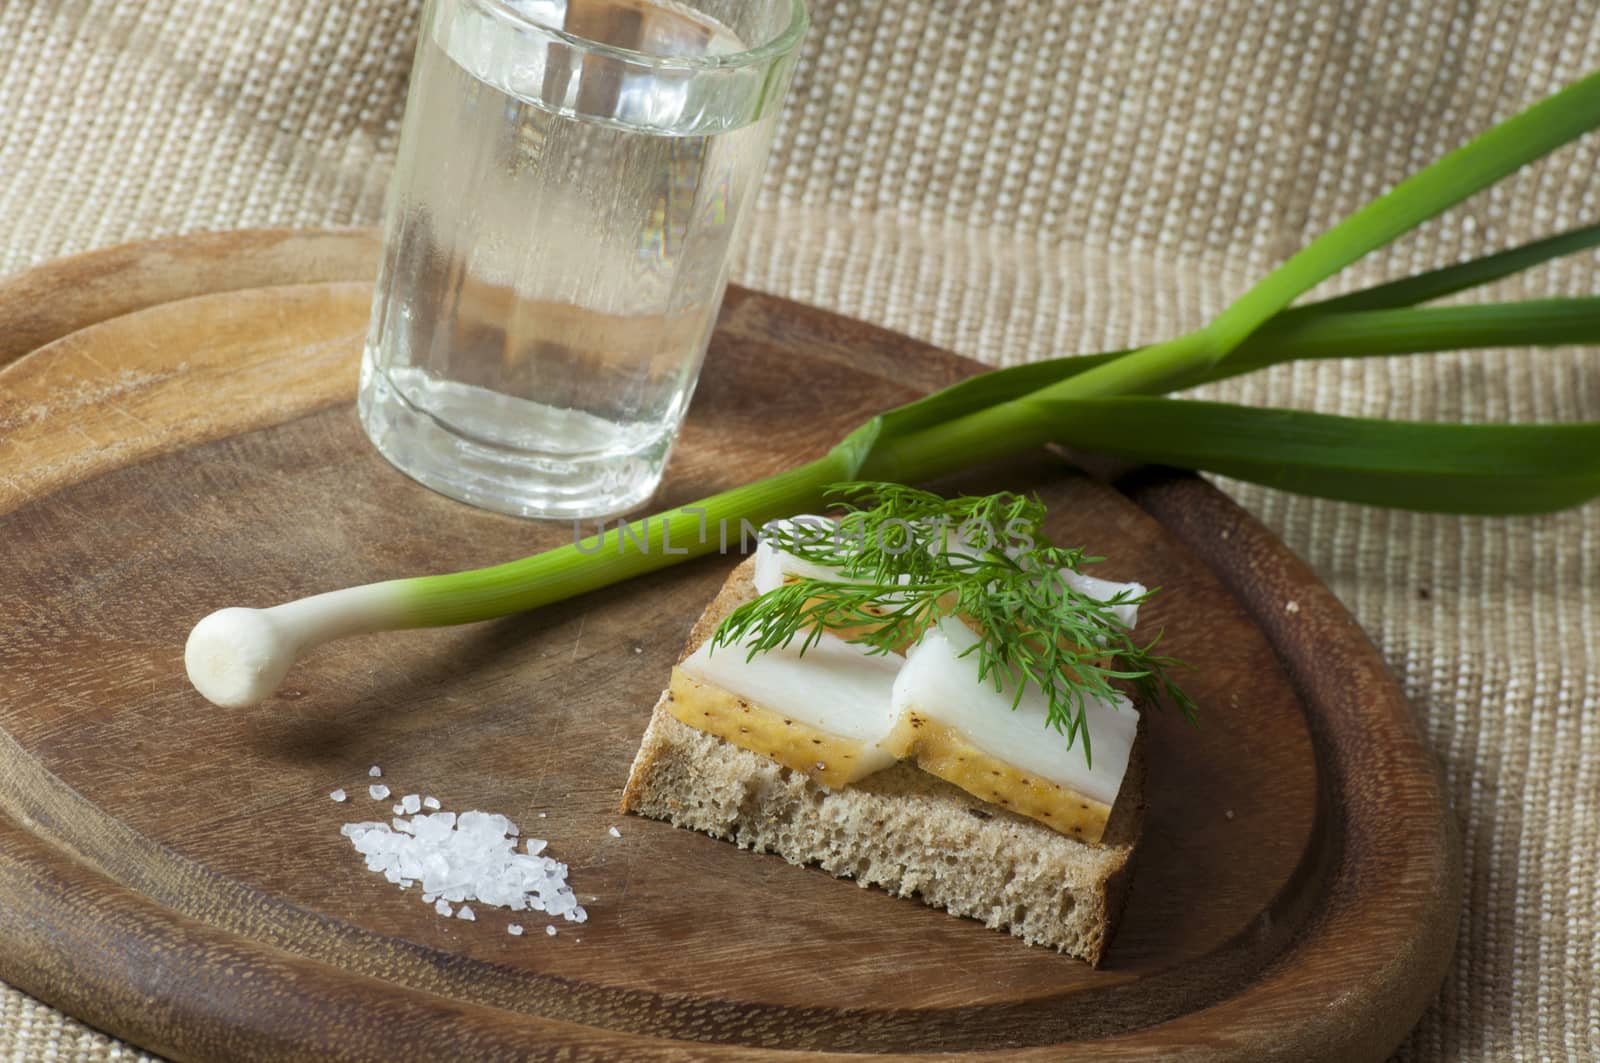 Sandwich with salted lard on rye bread and vodka and garlic by dred